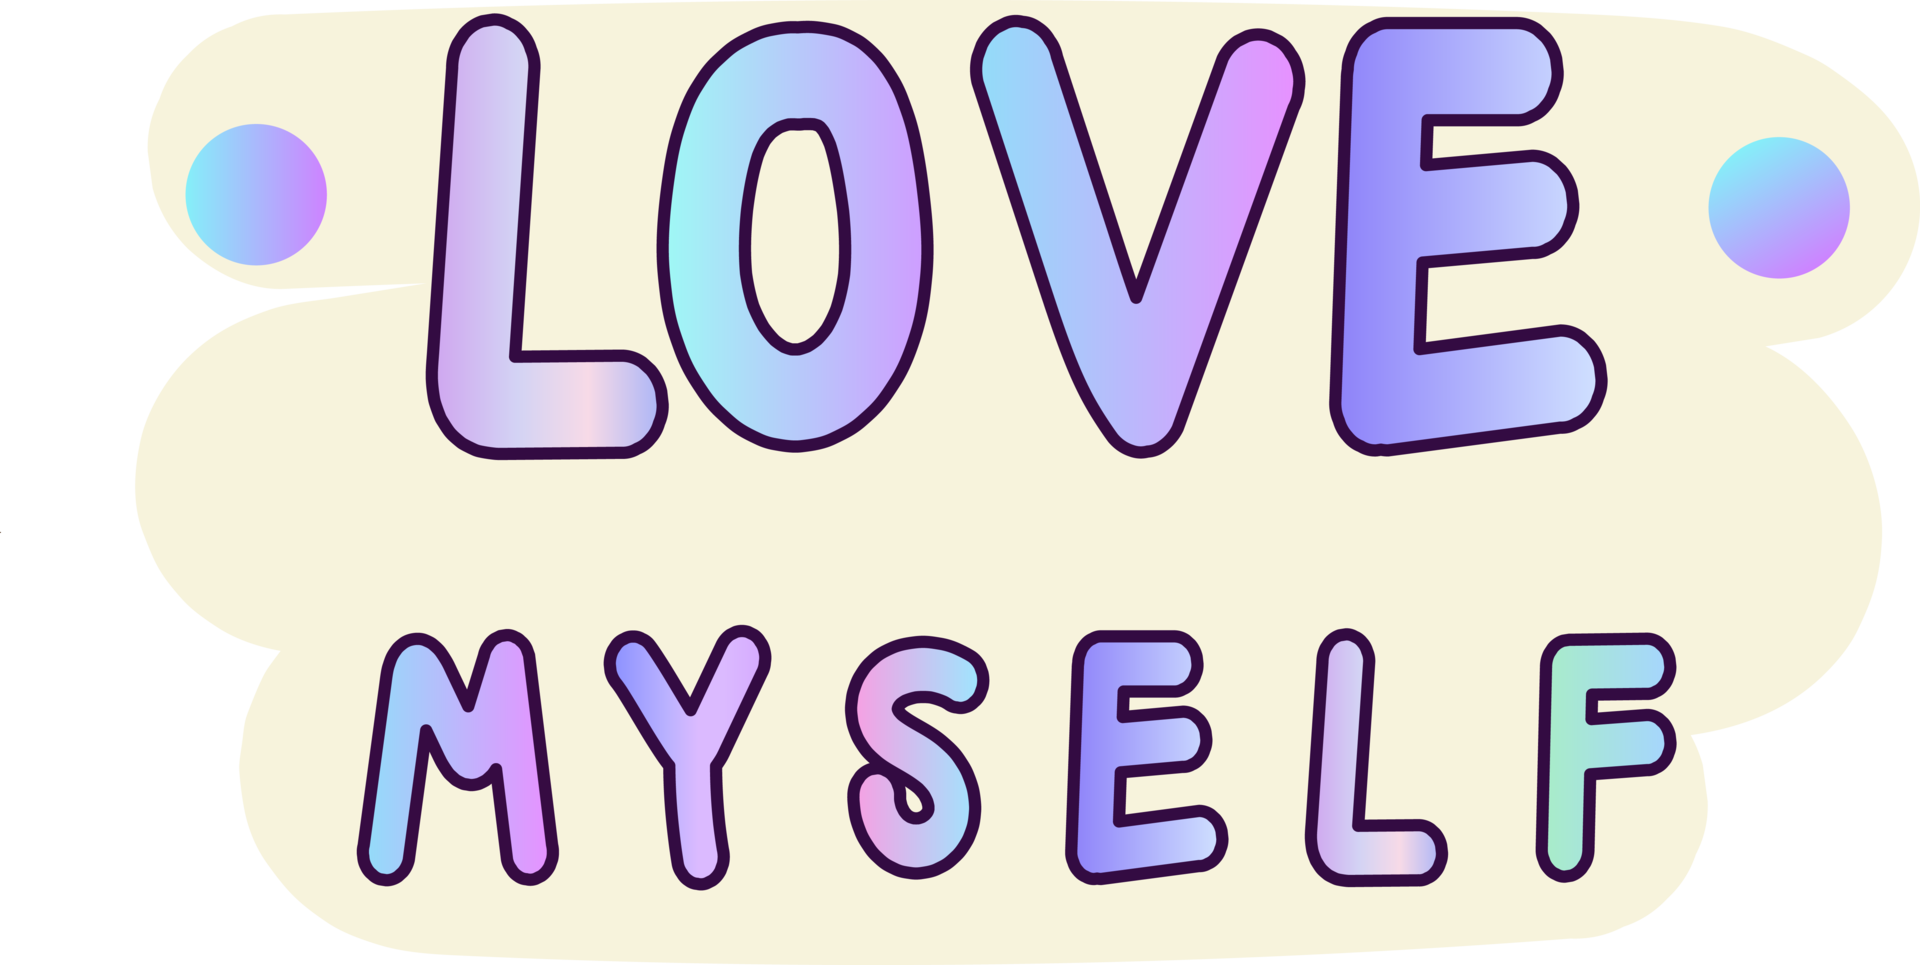 loveyourself love yourself text sticker by @itzblacktzy